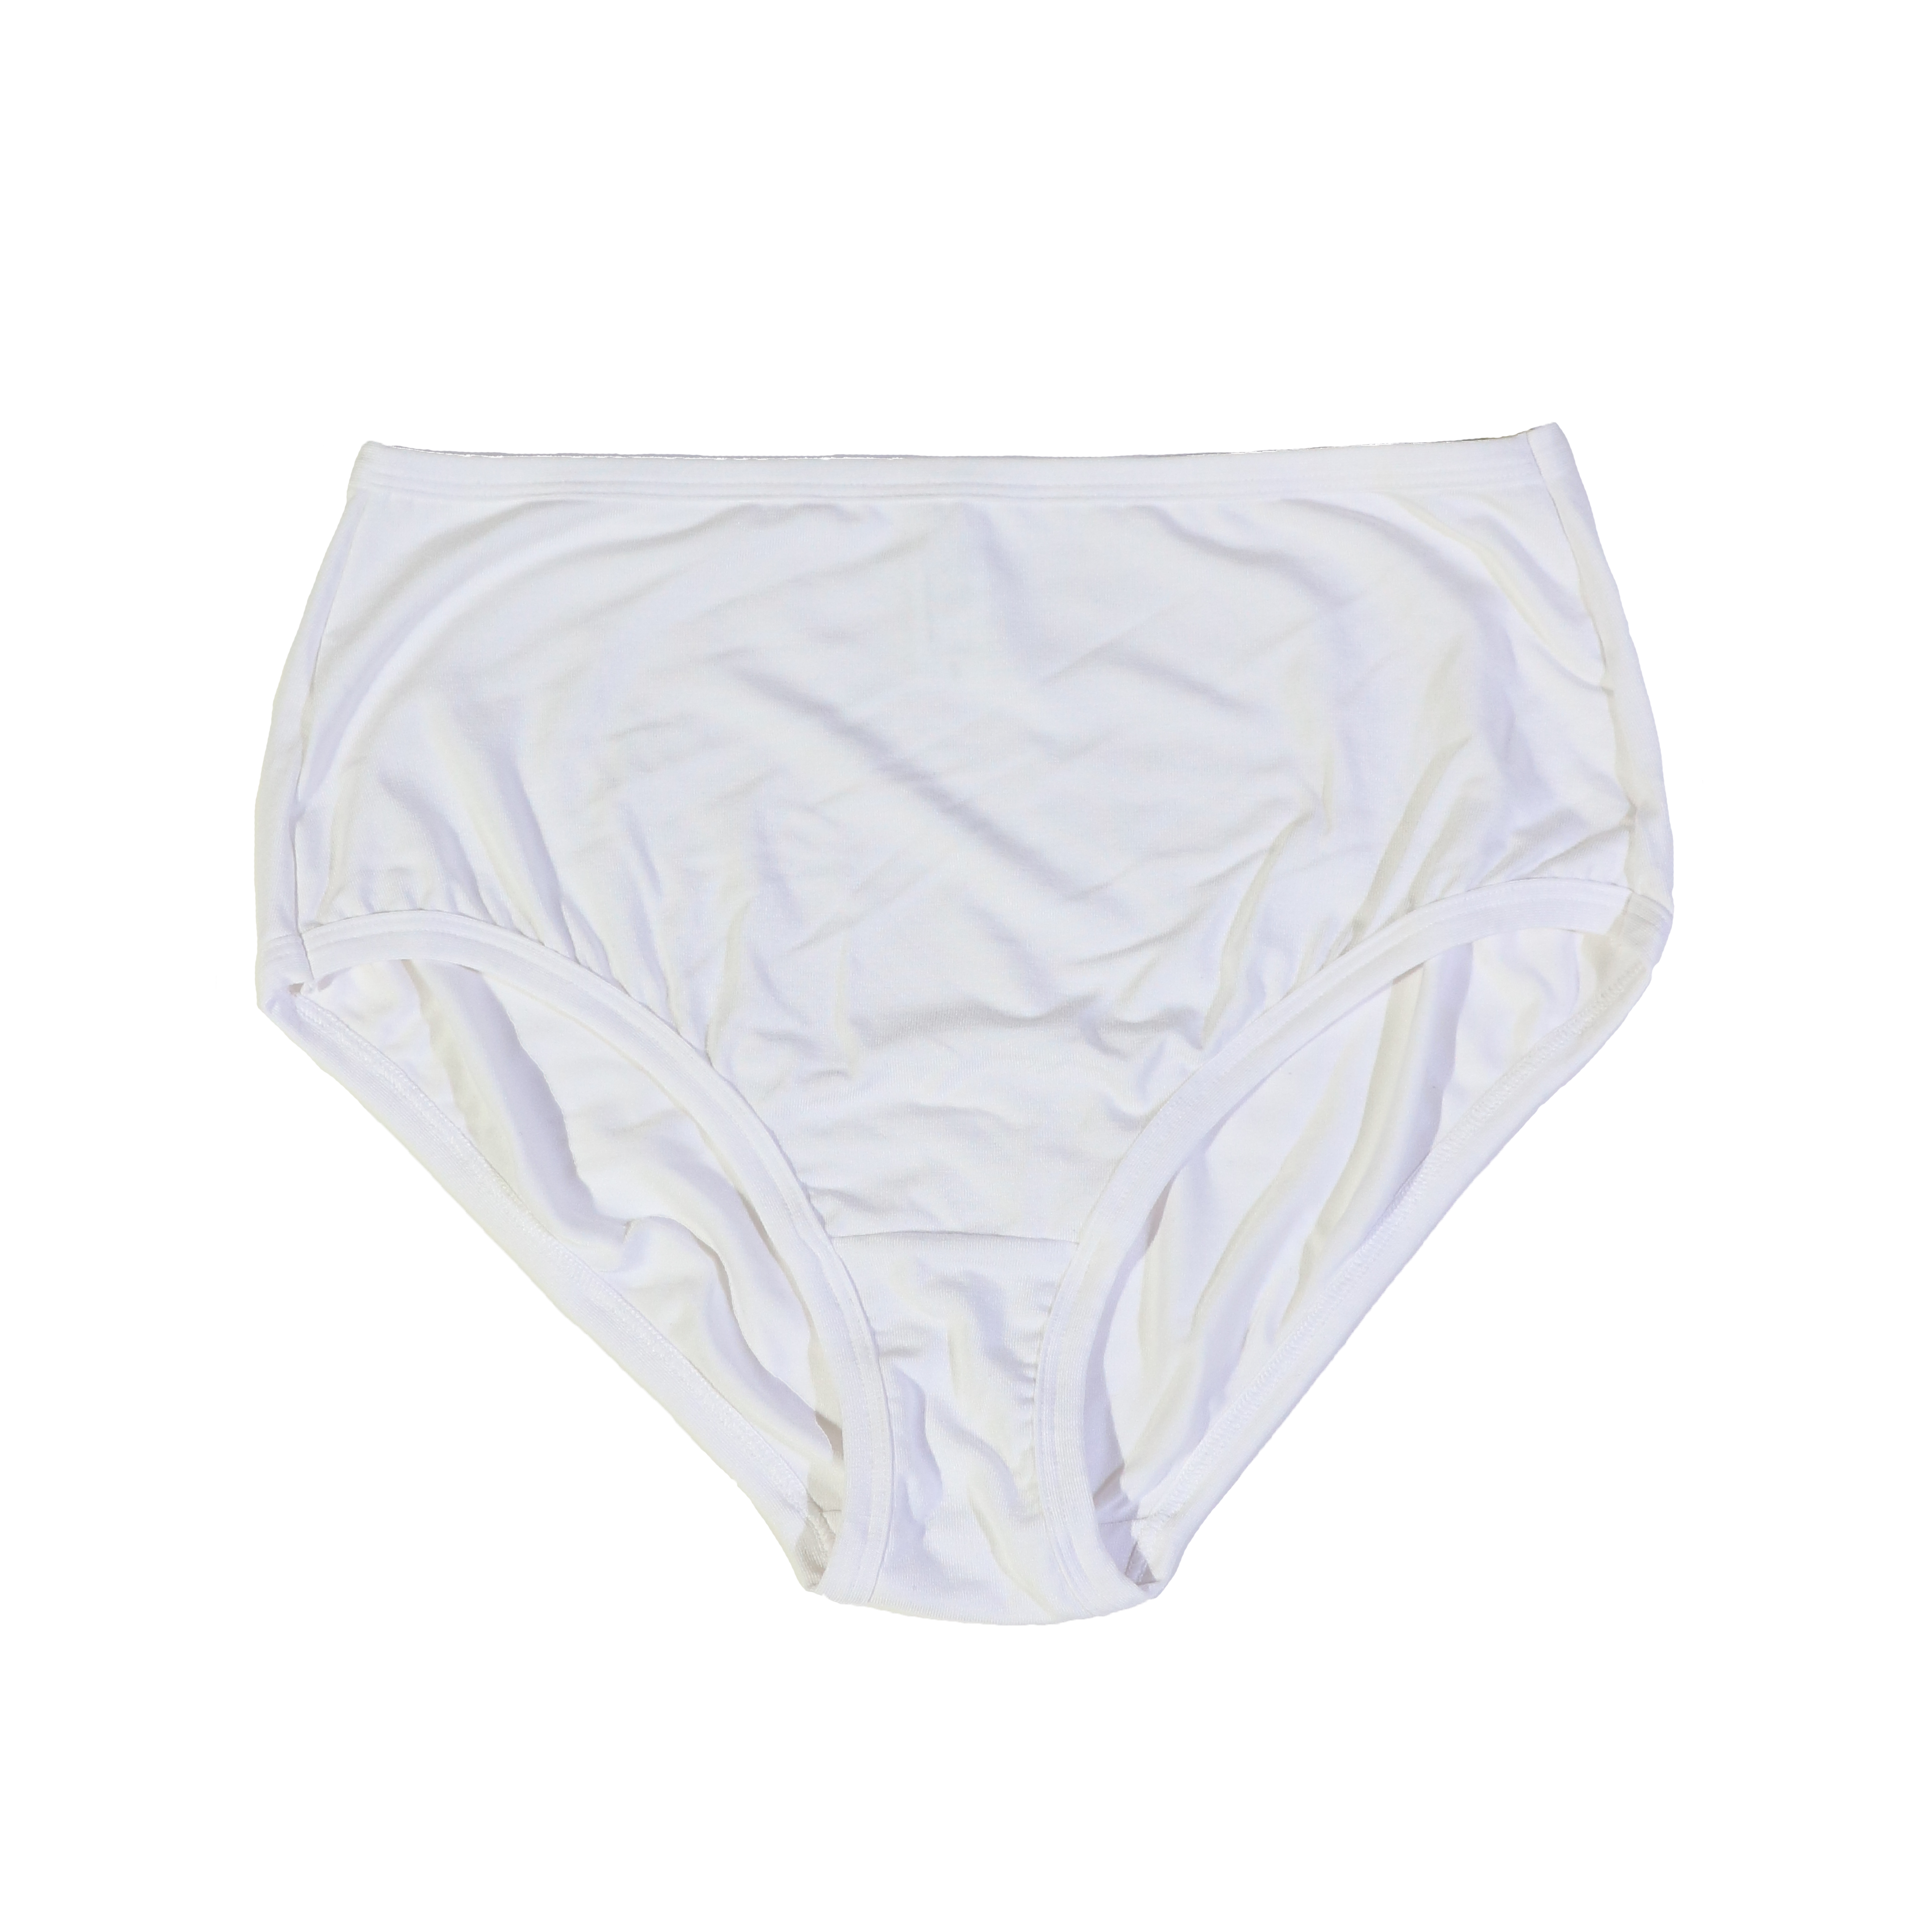 Orly High Brief in White Sample - MARY YOUNG